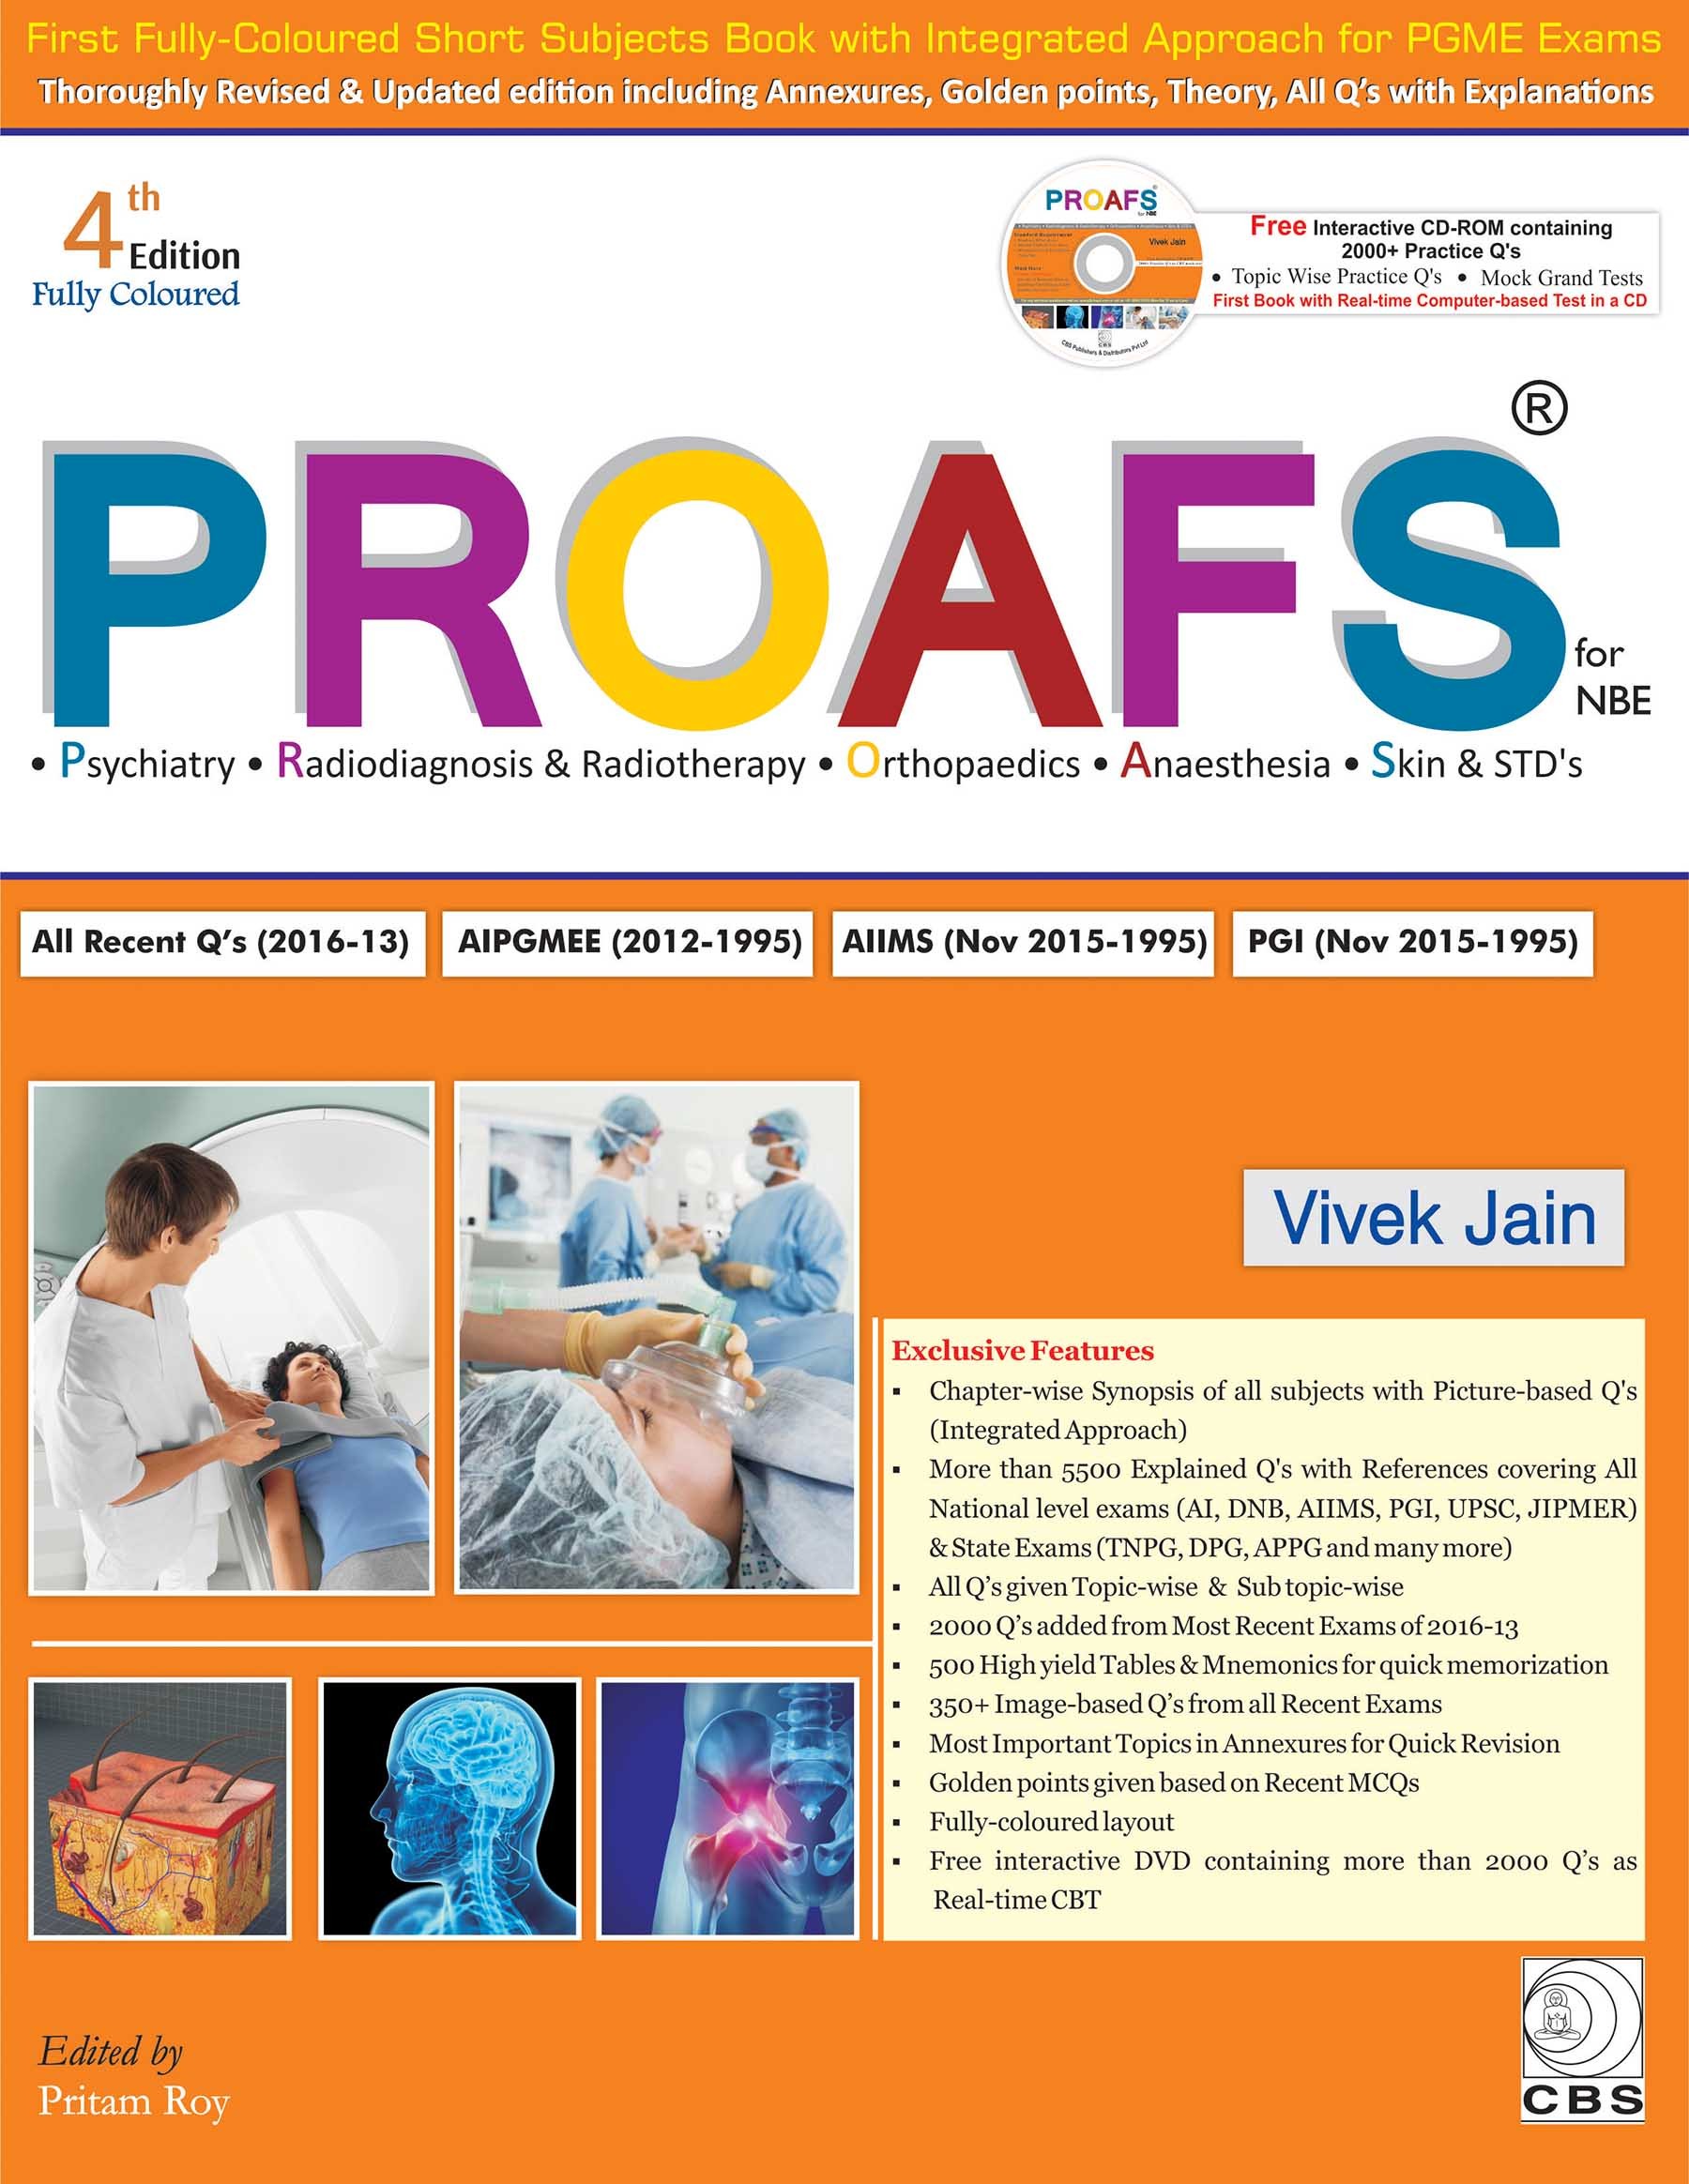 Proafs For Nbe(Psychiatry, Radiodiagnosis & Radiotherapy, Orthopaedics, Anaesthesia, Skin & Stds 